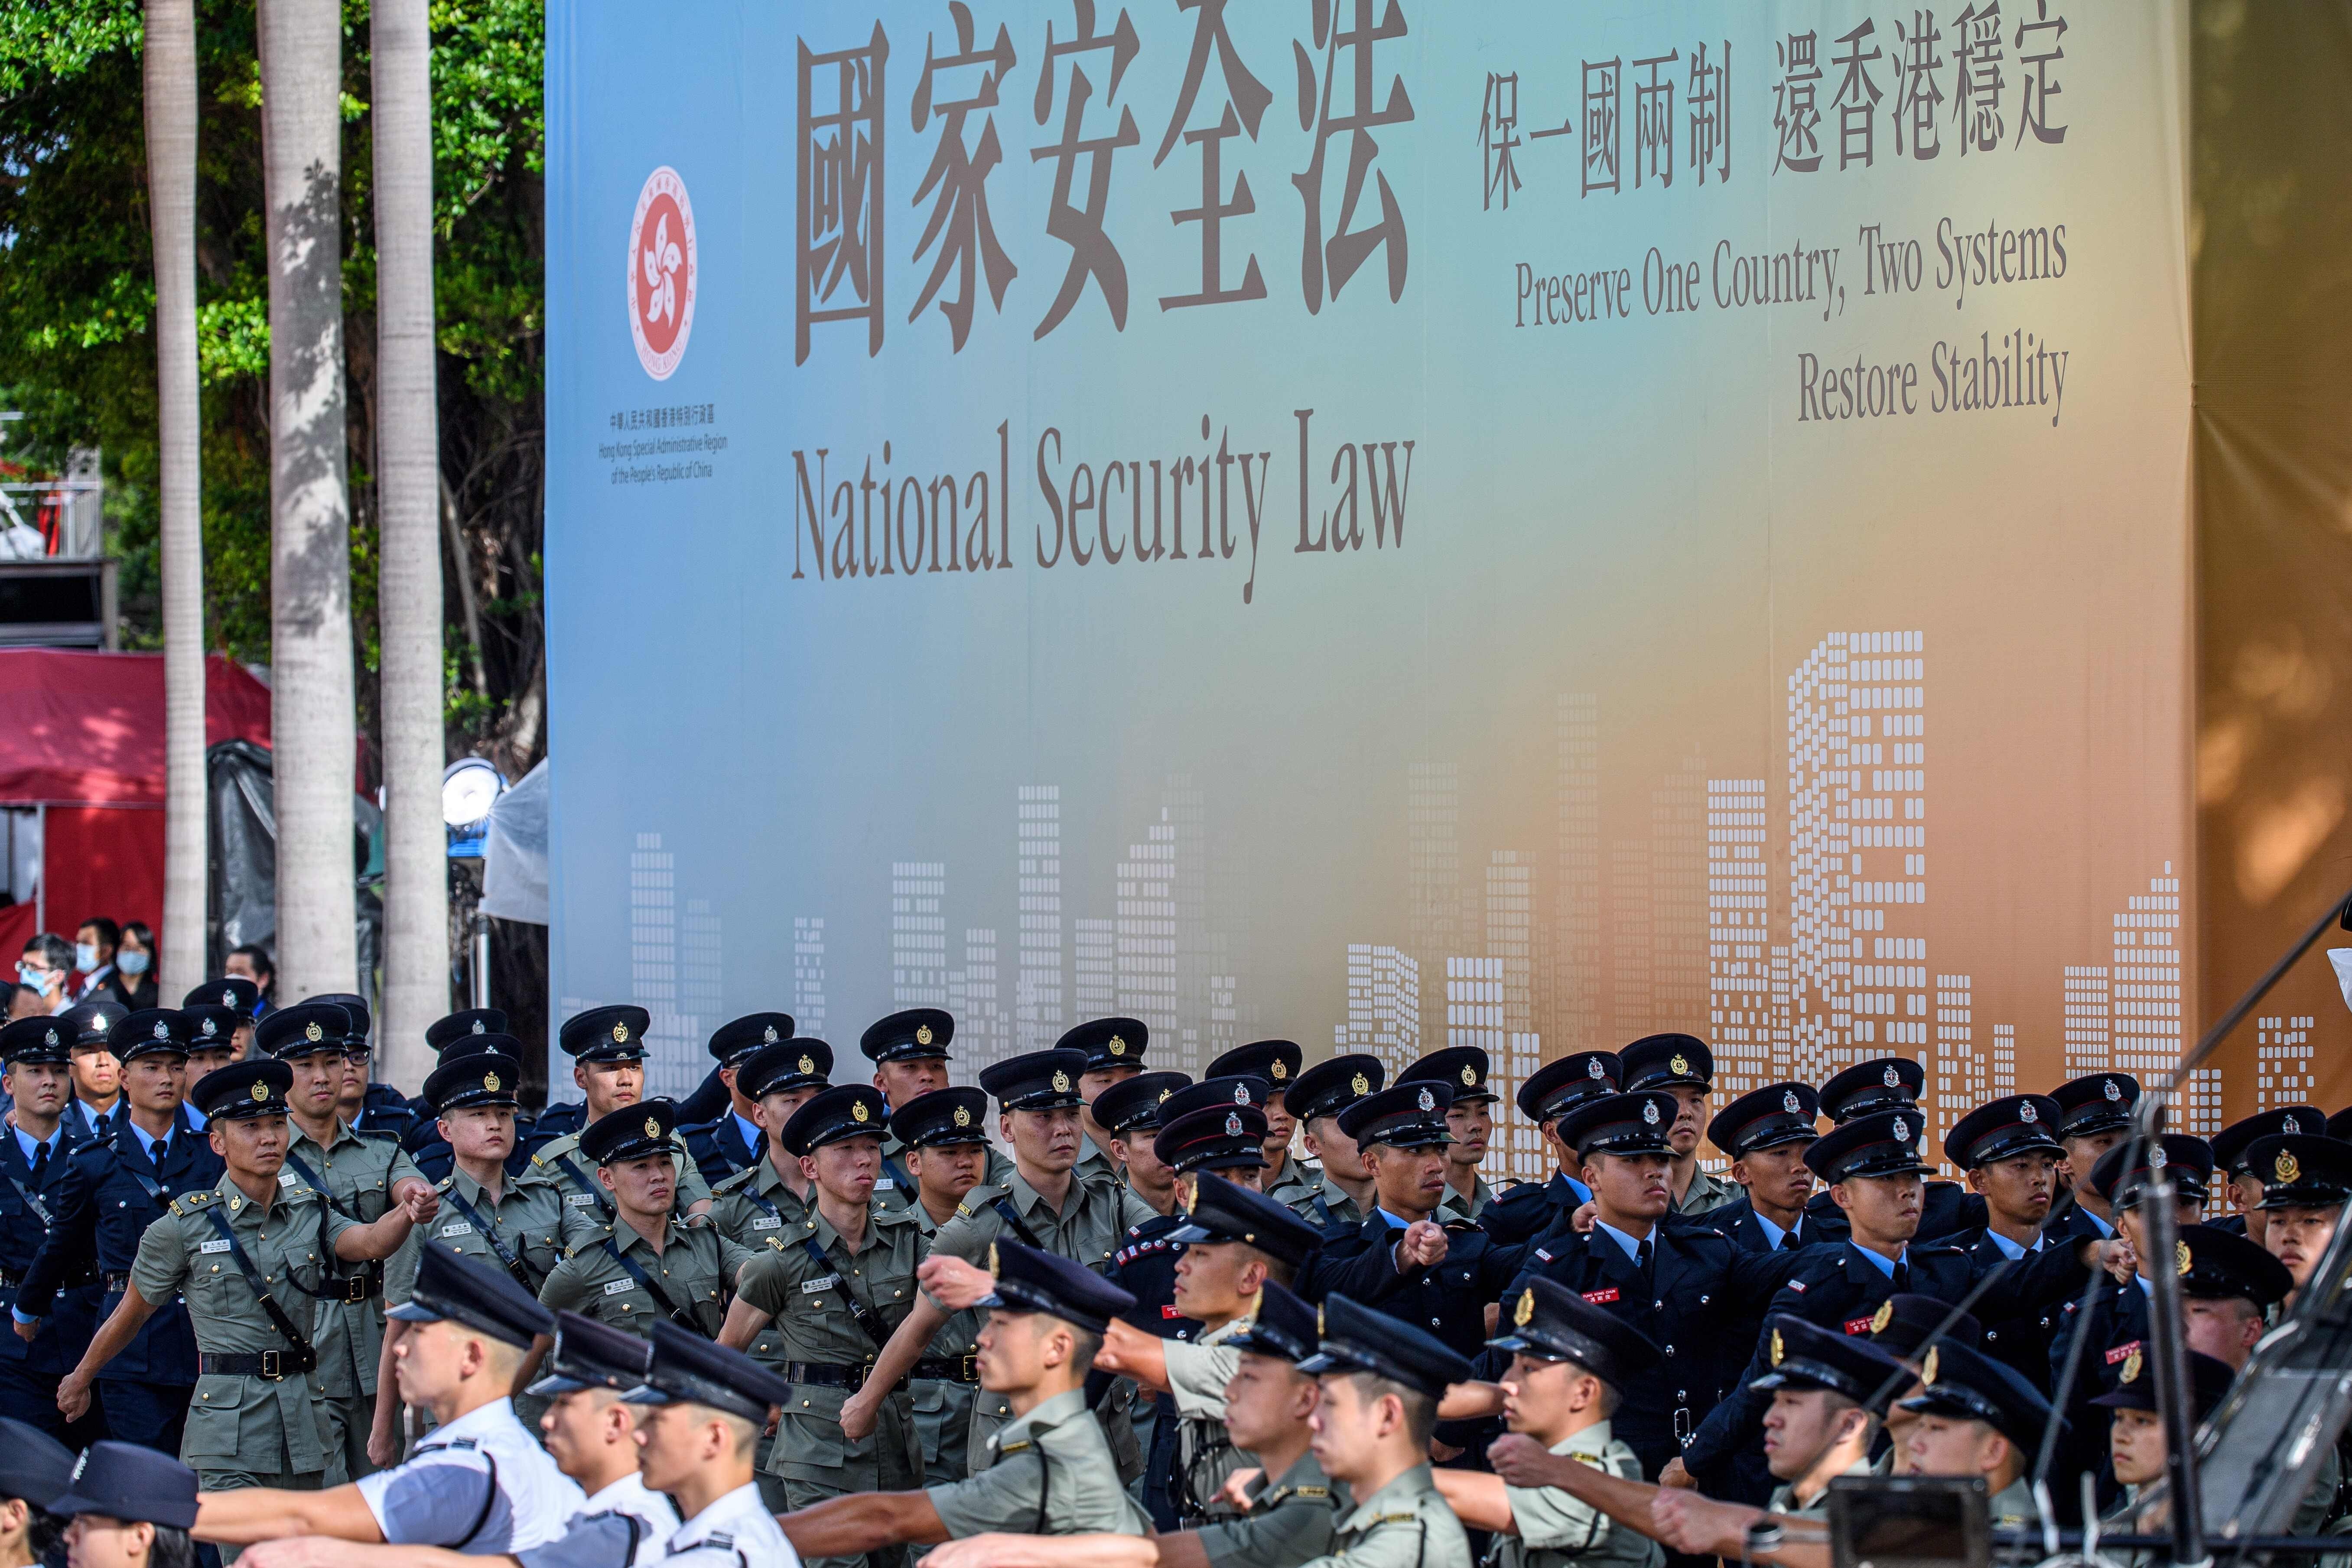 Members of Hong Kong’s uniformed services march next to a banner supporting the new national security law at the end of a flag-raising ceremony to mark the 23rd anniversary of Hong Kong’s handover from Britain to China on July 1. Photo: AFP